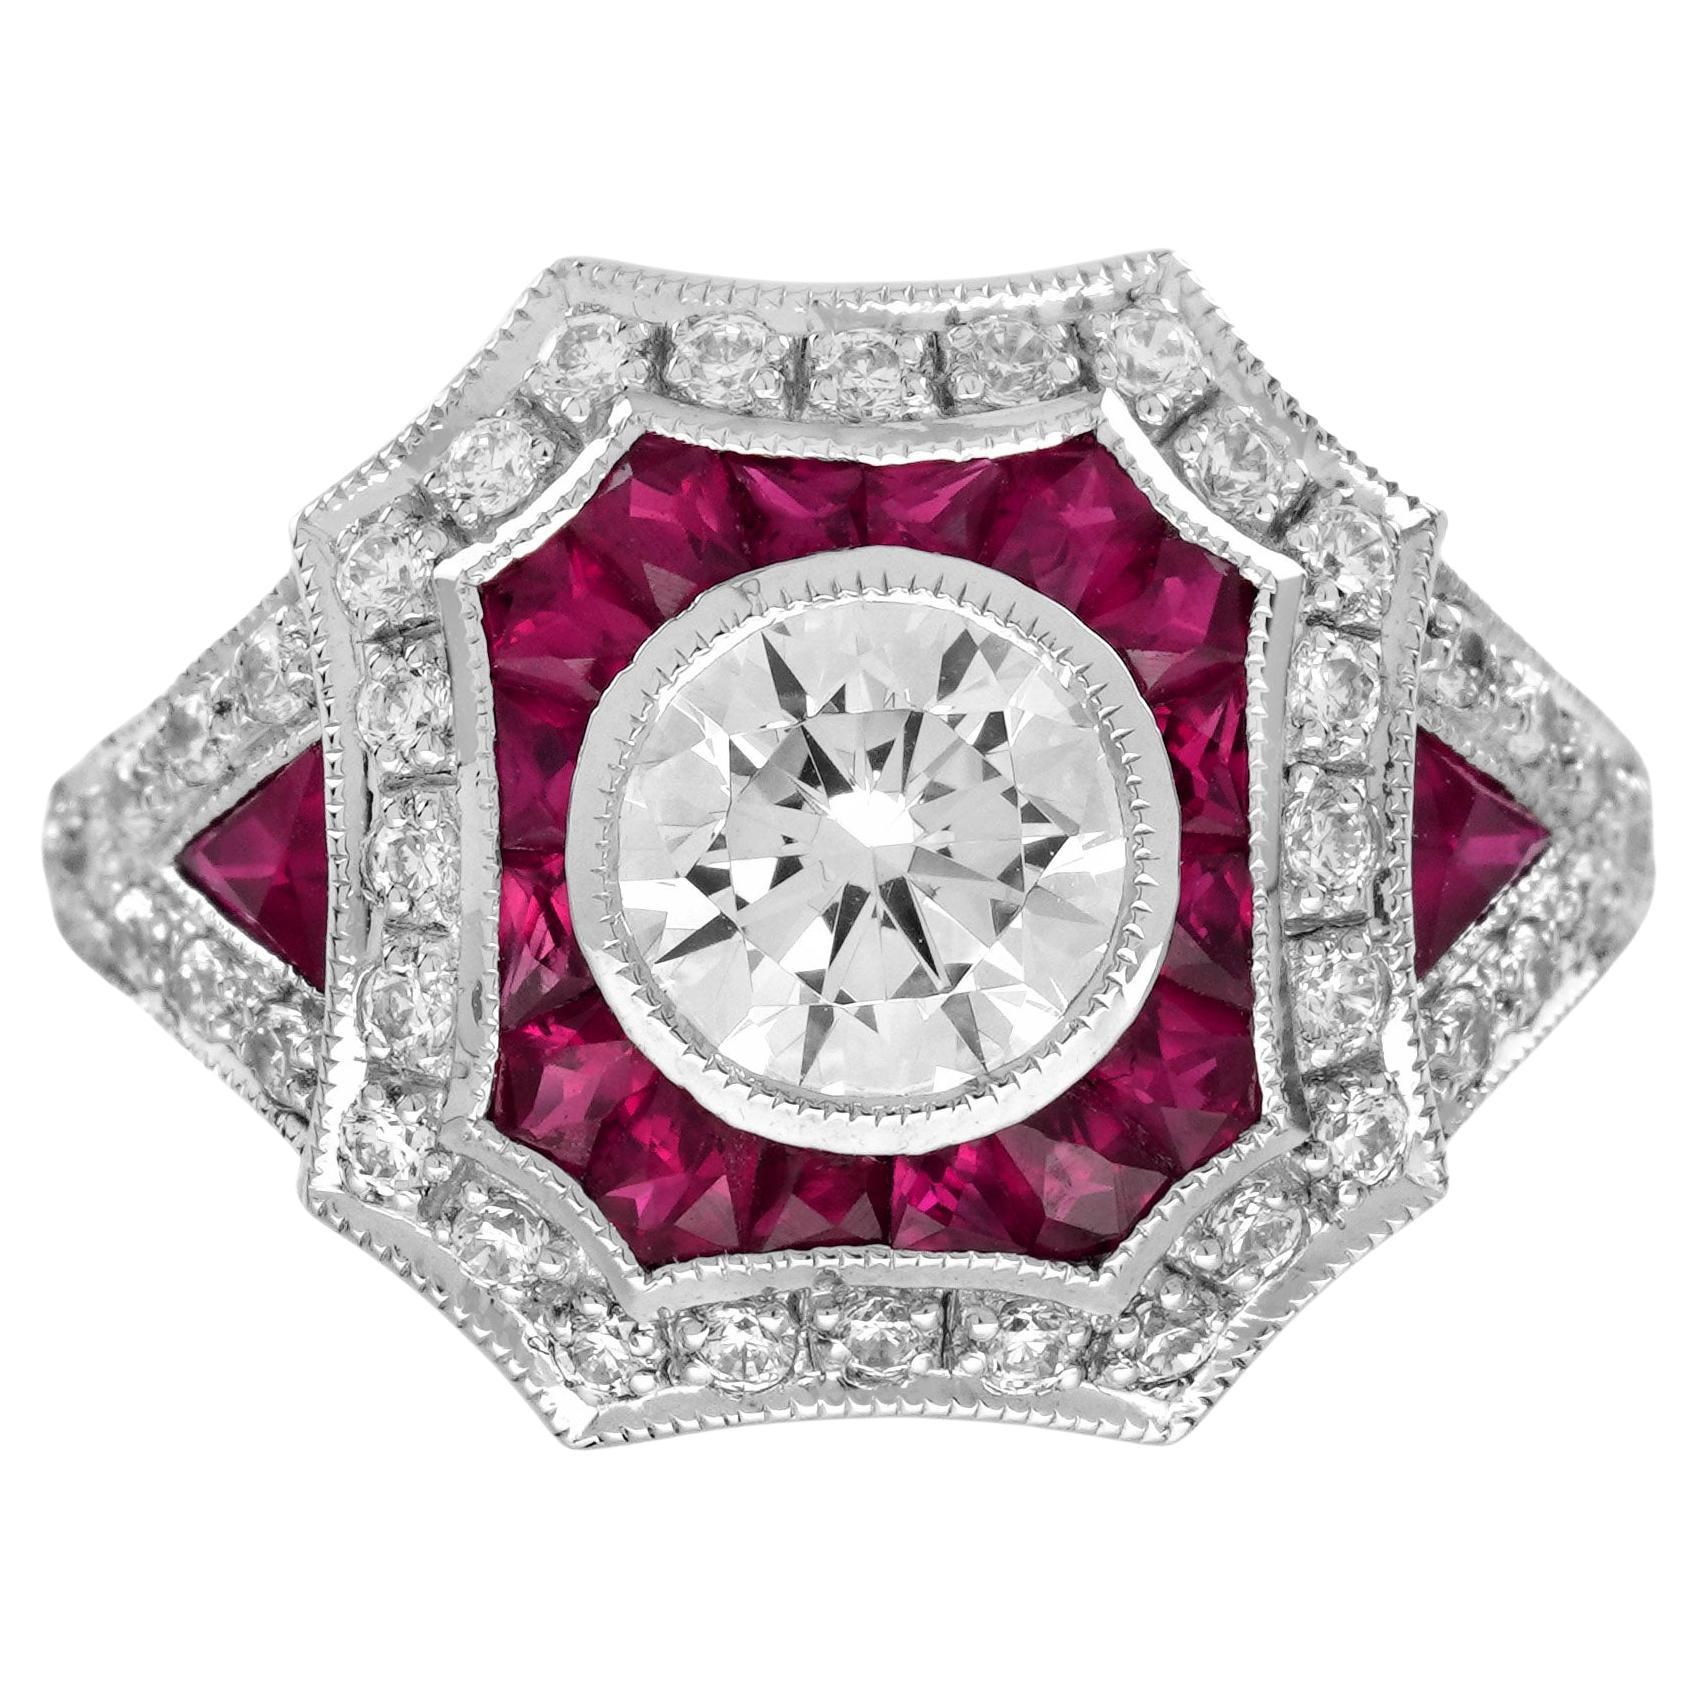 1 Ct. Diamond and Ruby Art Deco Style Engagement Ring in 18K White Gold For Sale